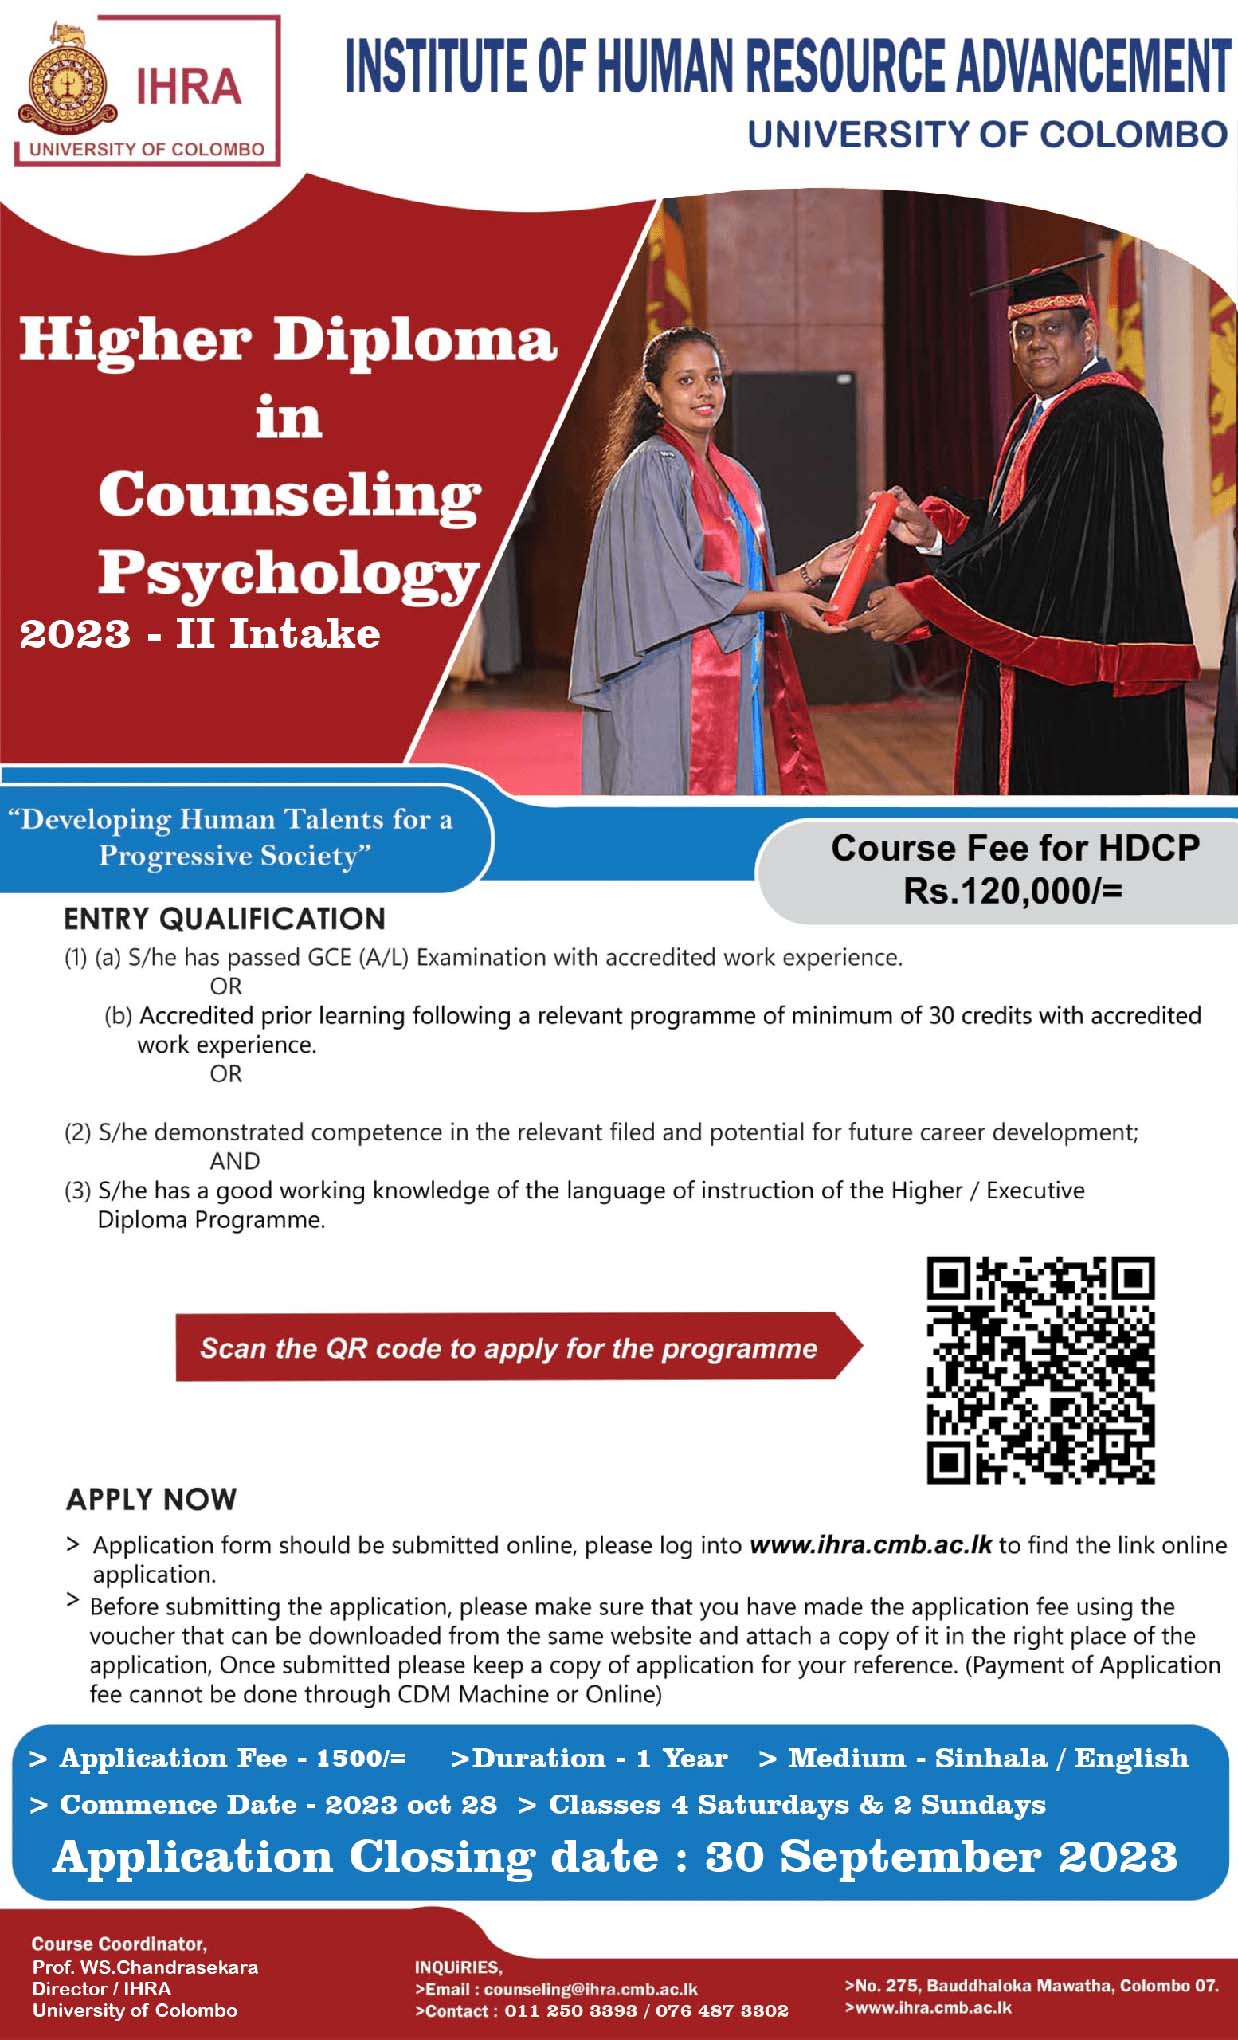 Higher Diploma in Counselling Psychology (2023 - Batch II) - University of Colombo (IHRA)